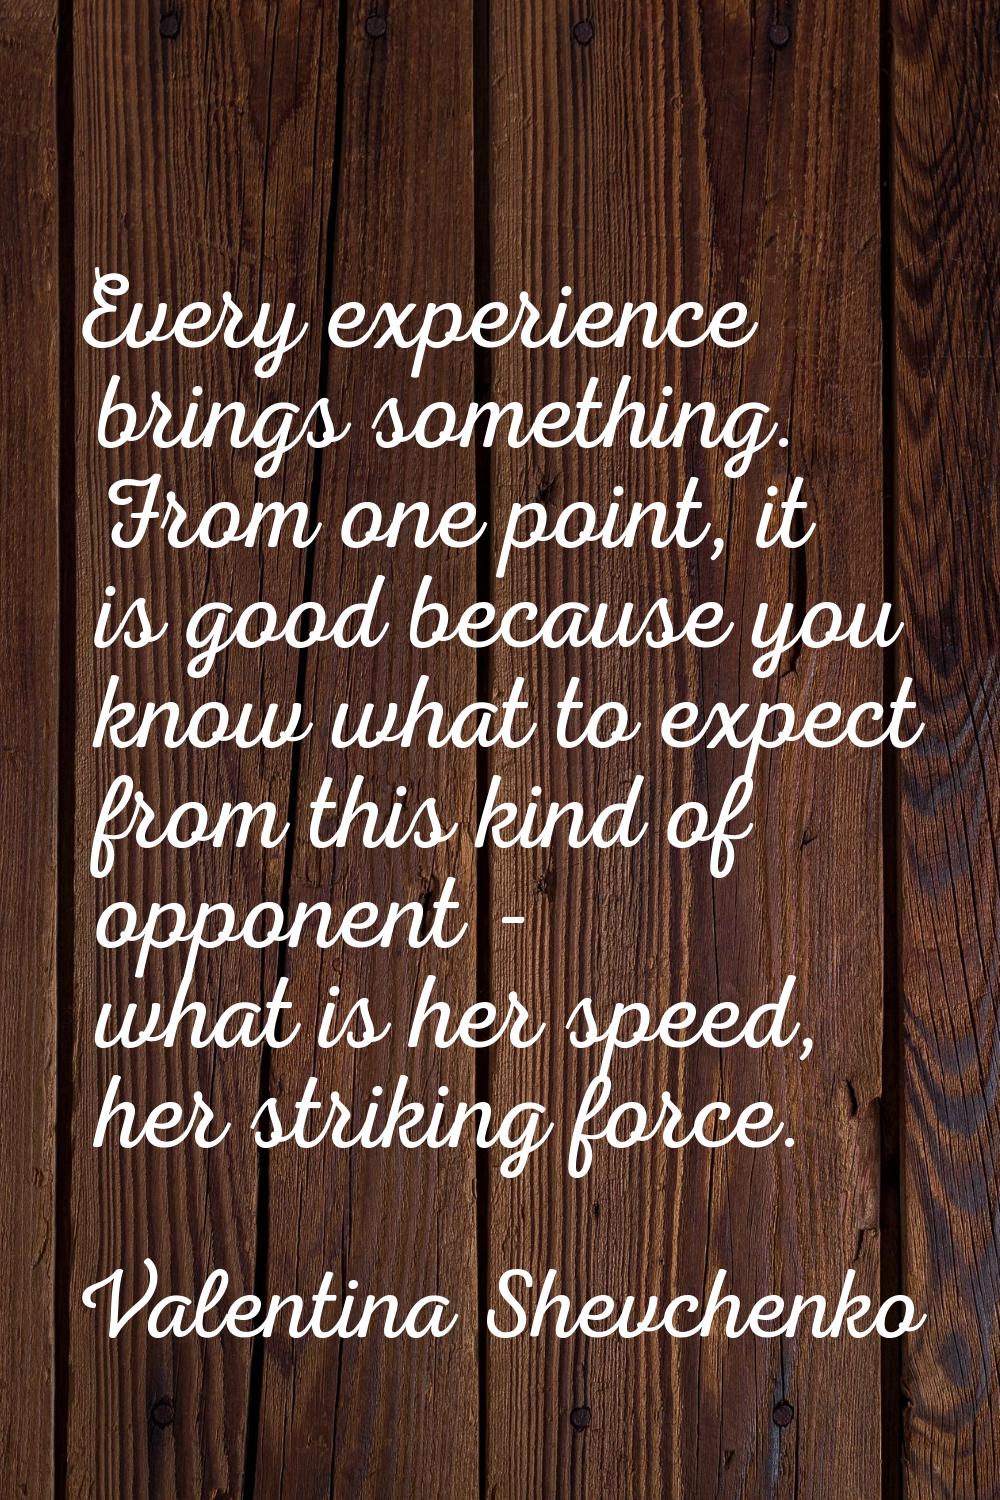 Every experience brings something. From one point, it is good because you know what to expect from 